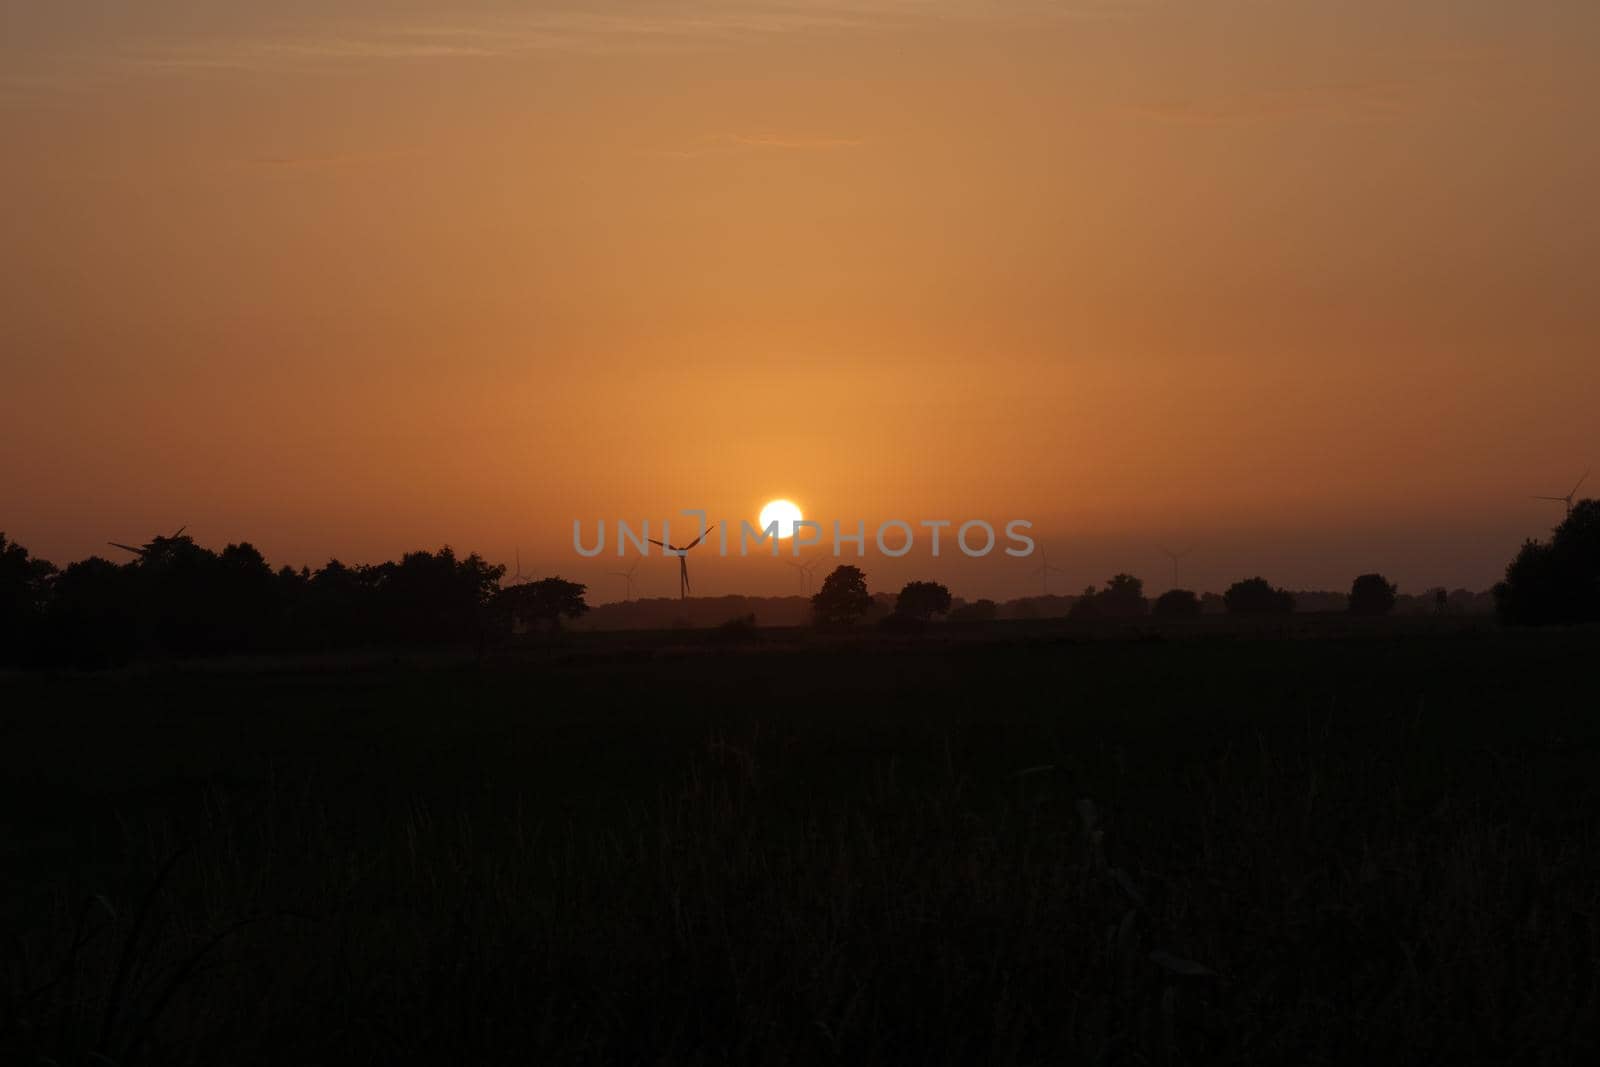 Beautyful sunset with reed and a contryside landscape in the foreground